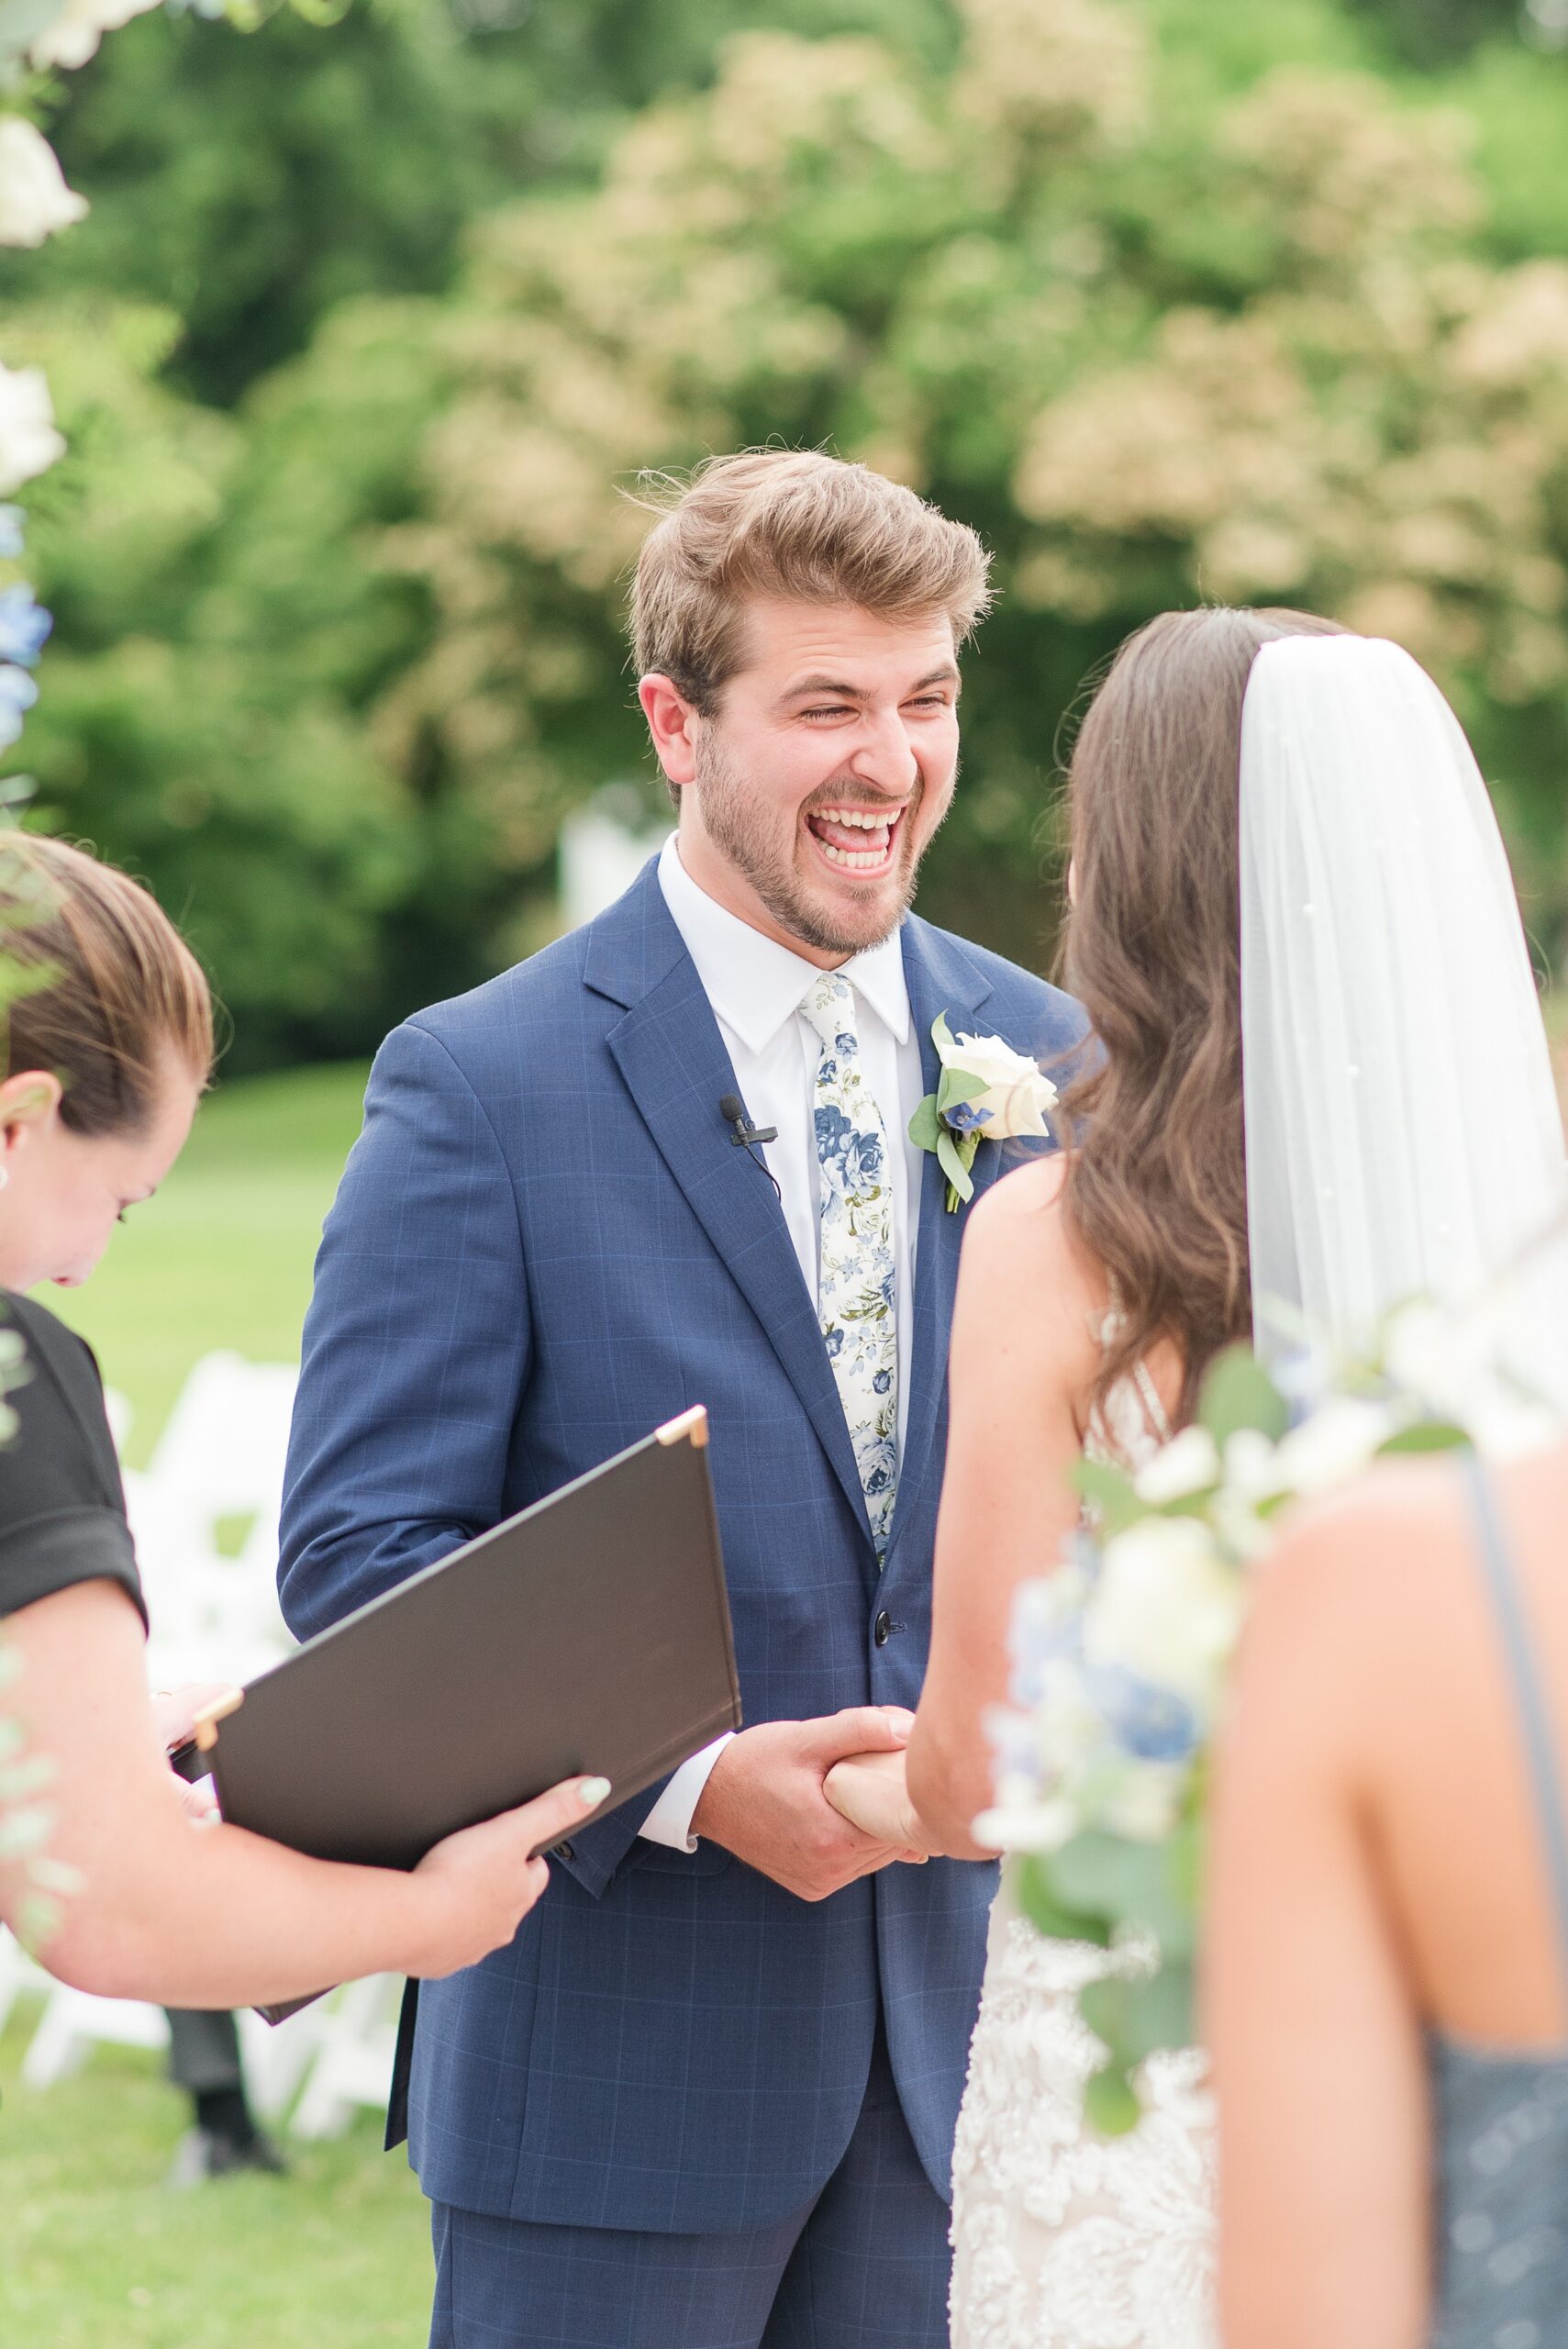 A groom laughs big during the vows at his wedding ceremony